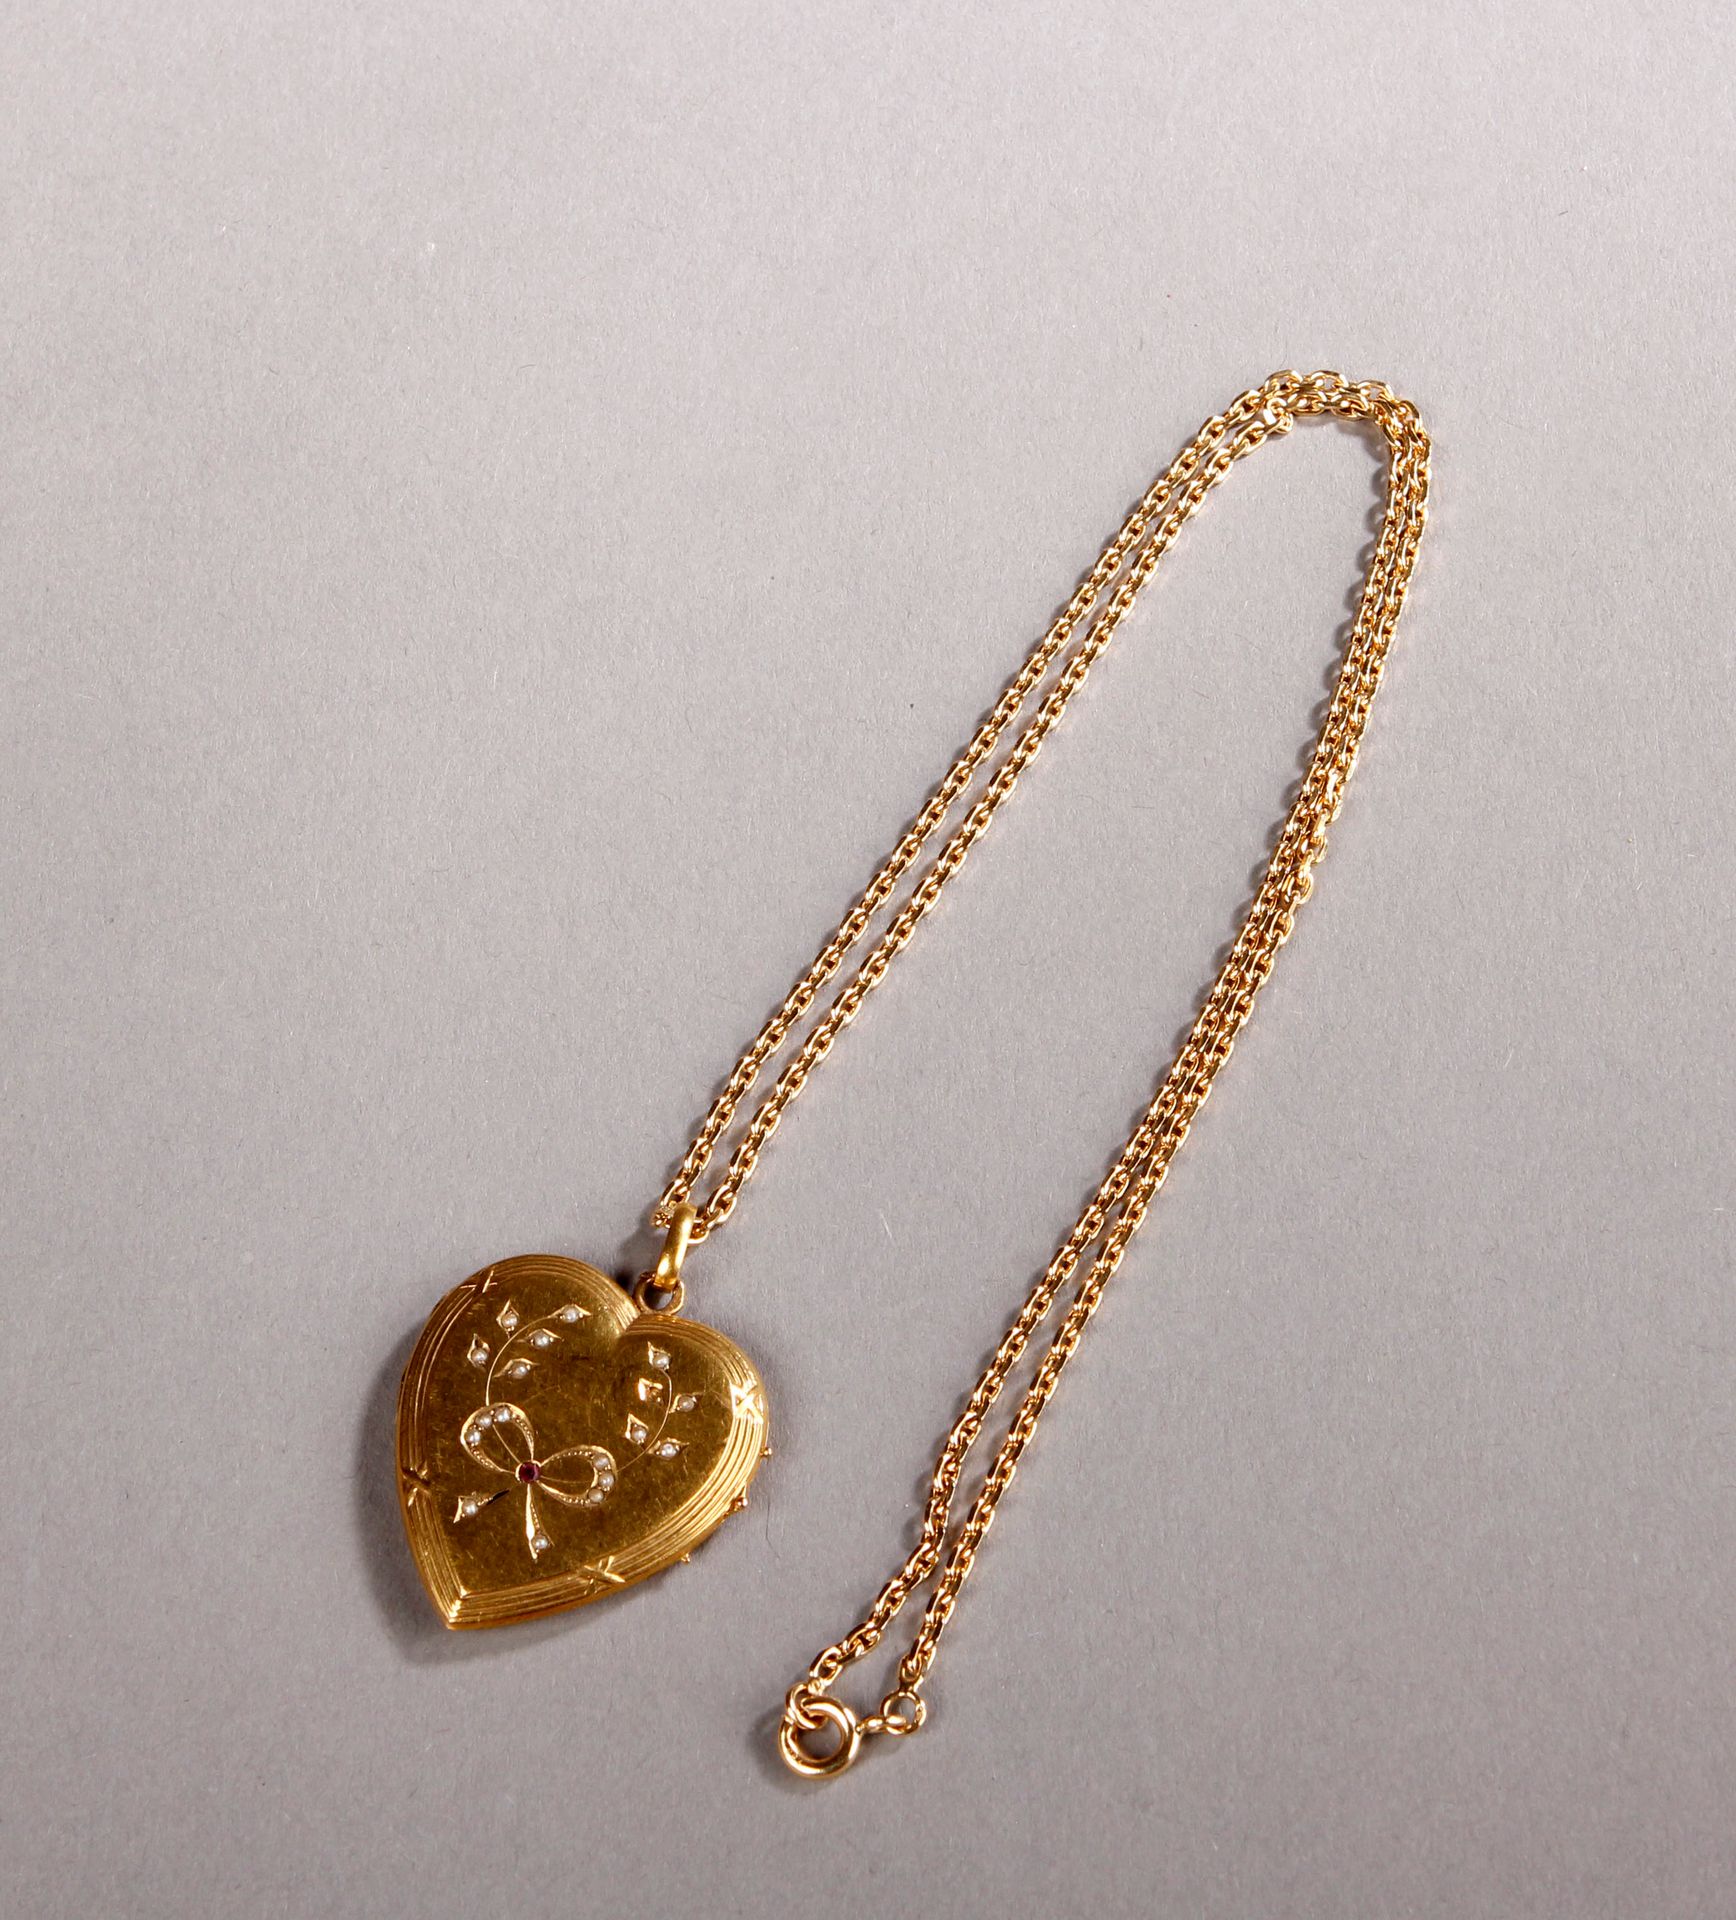 Null Heart pendant with chain in yellow gold.
Weight : 14,9 g